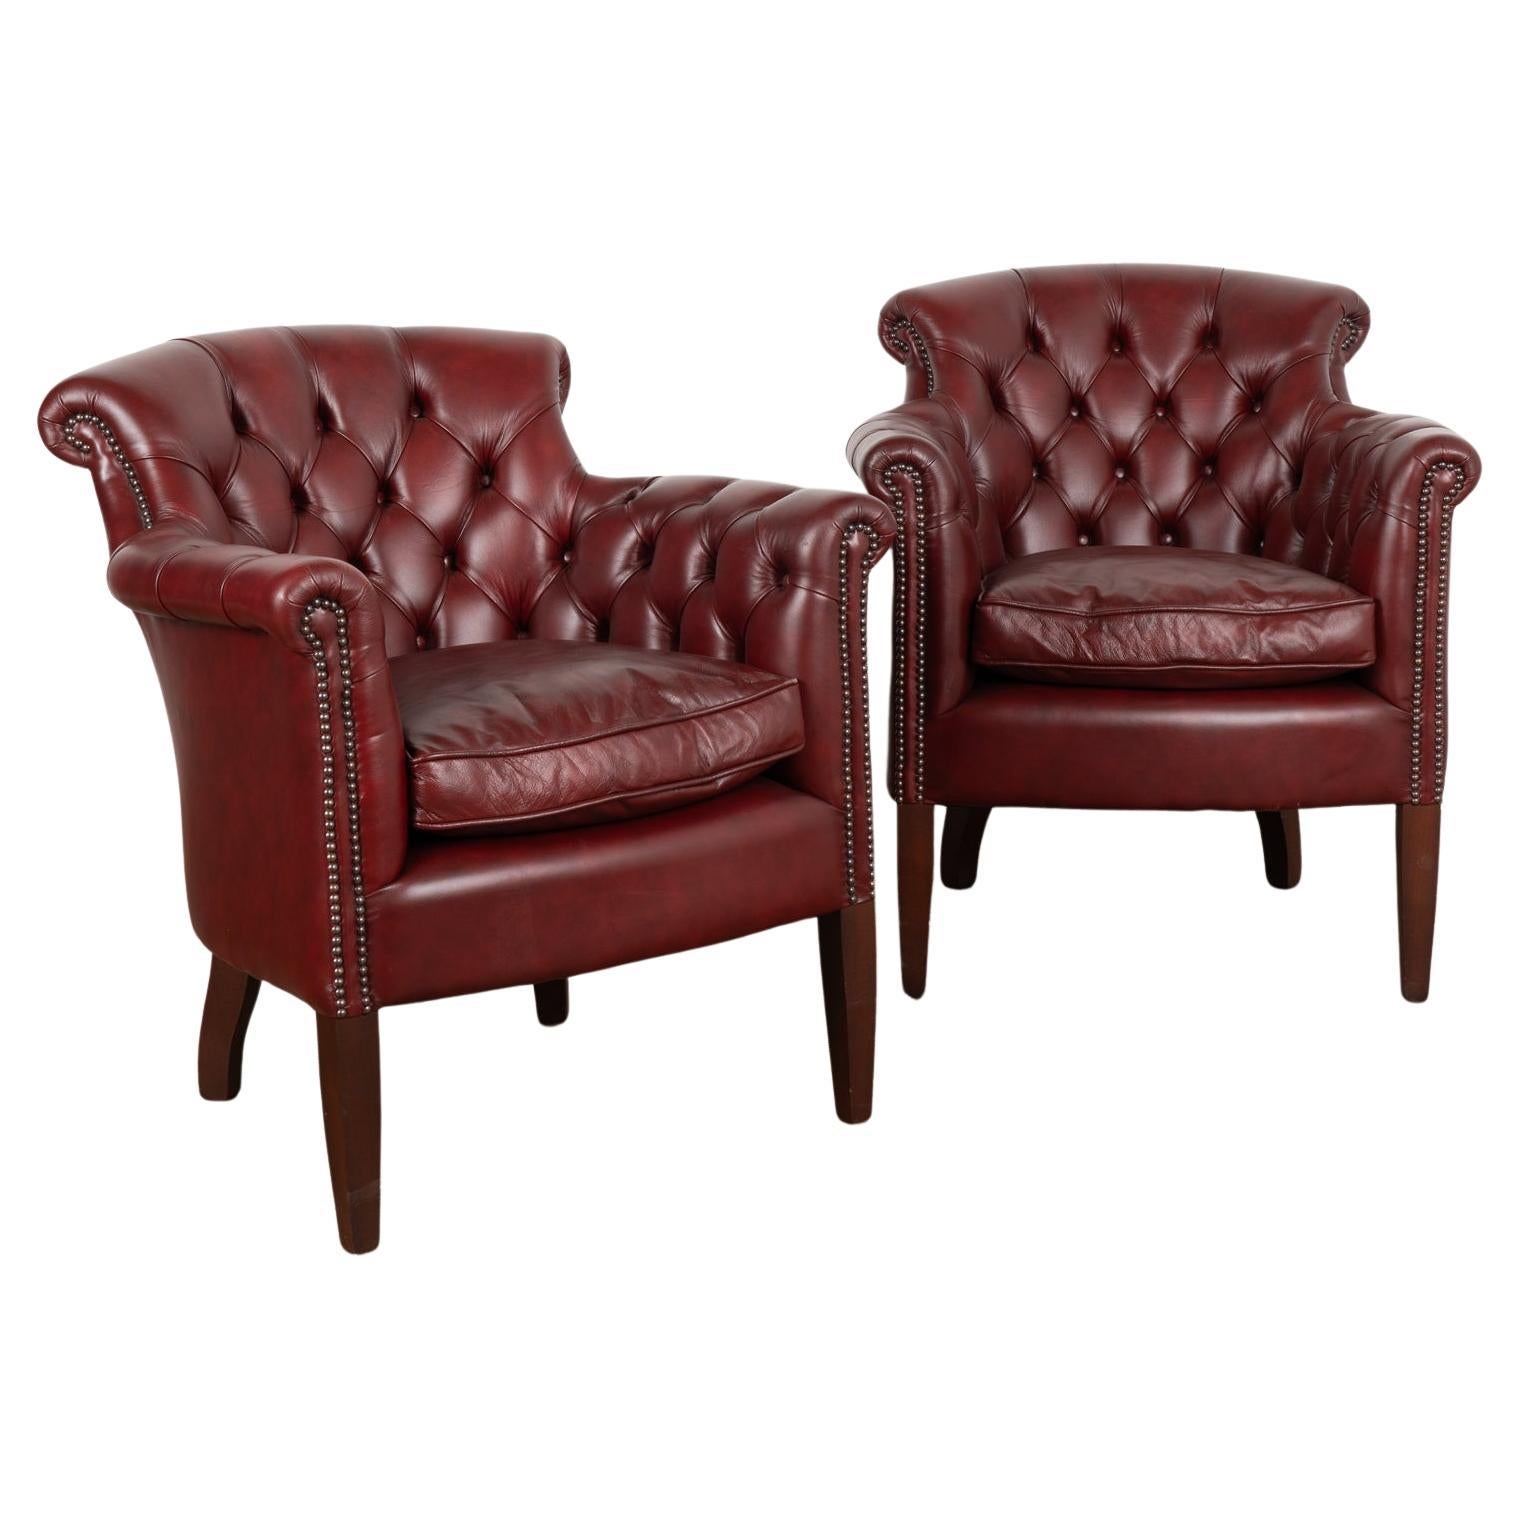 Pair, Vintage Red Leather Chesterfield Club Armchairs, Denmark circa 1940-60